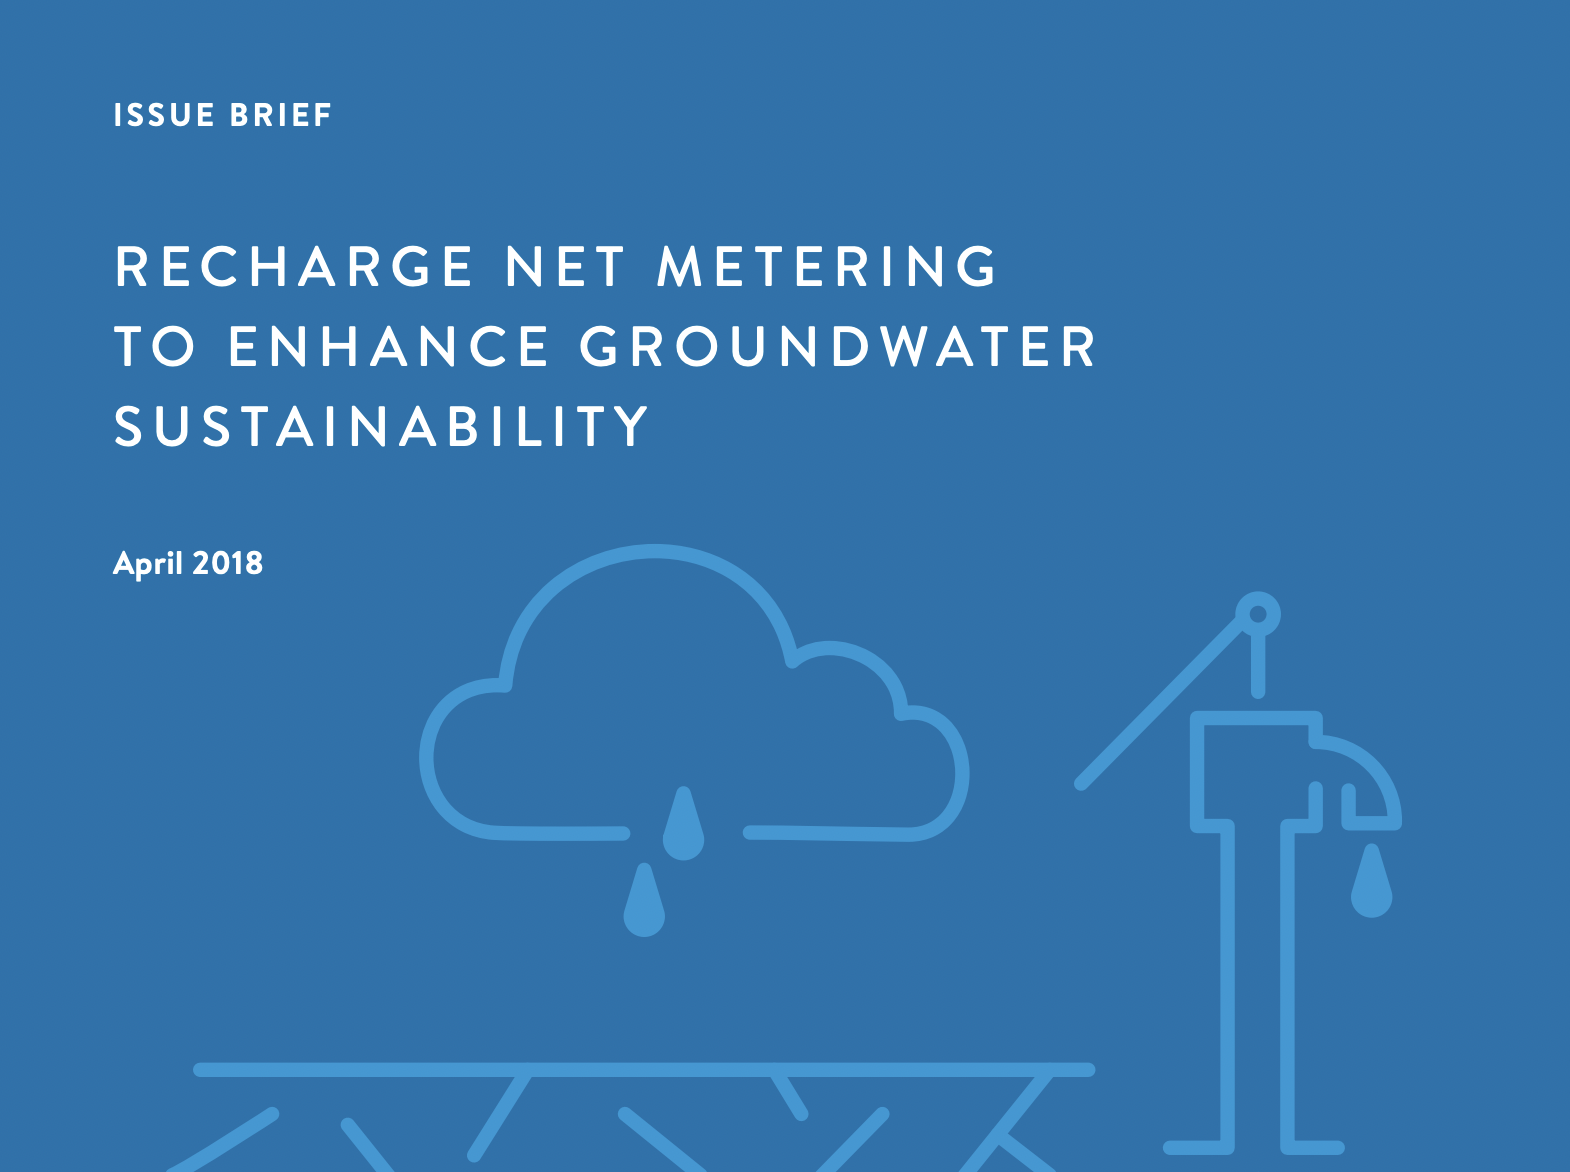 Recharge Net Metering to Enhance Groundwater Sustainability